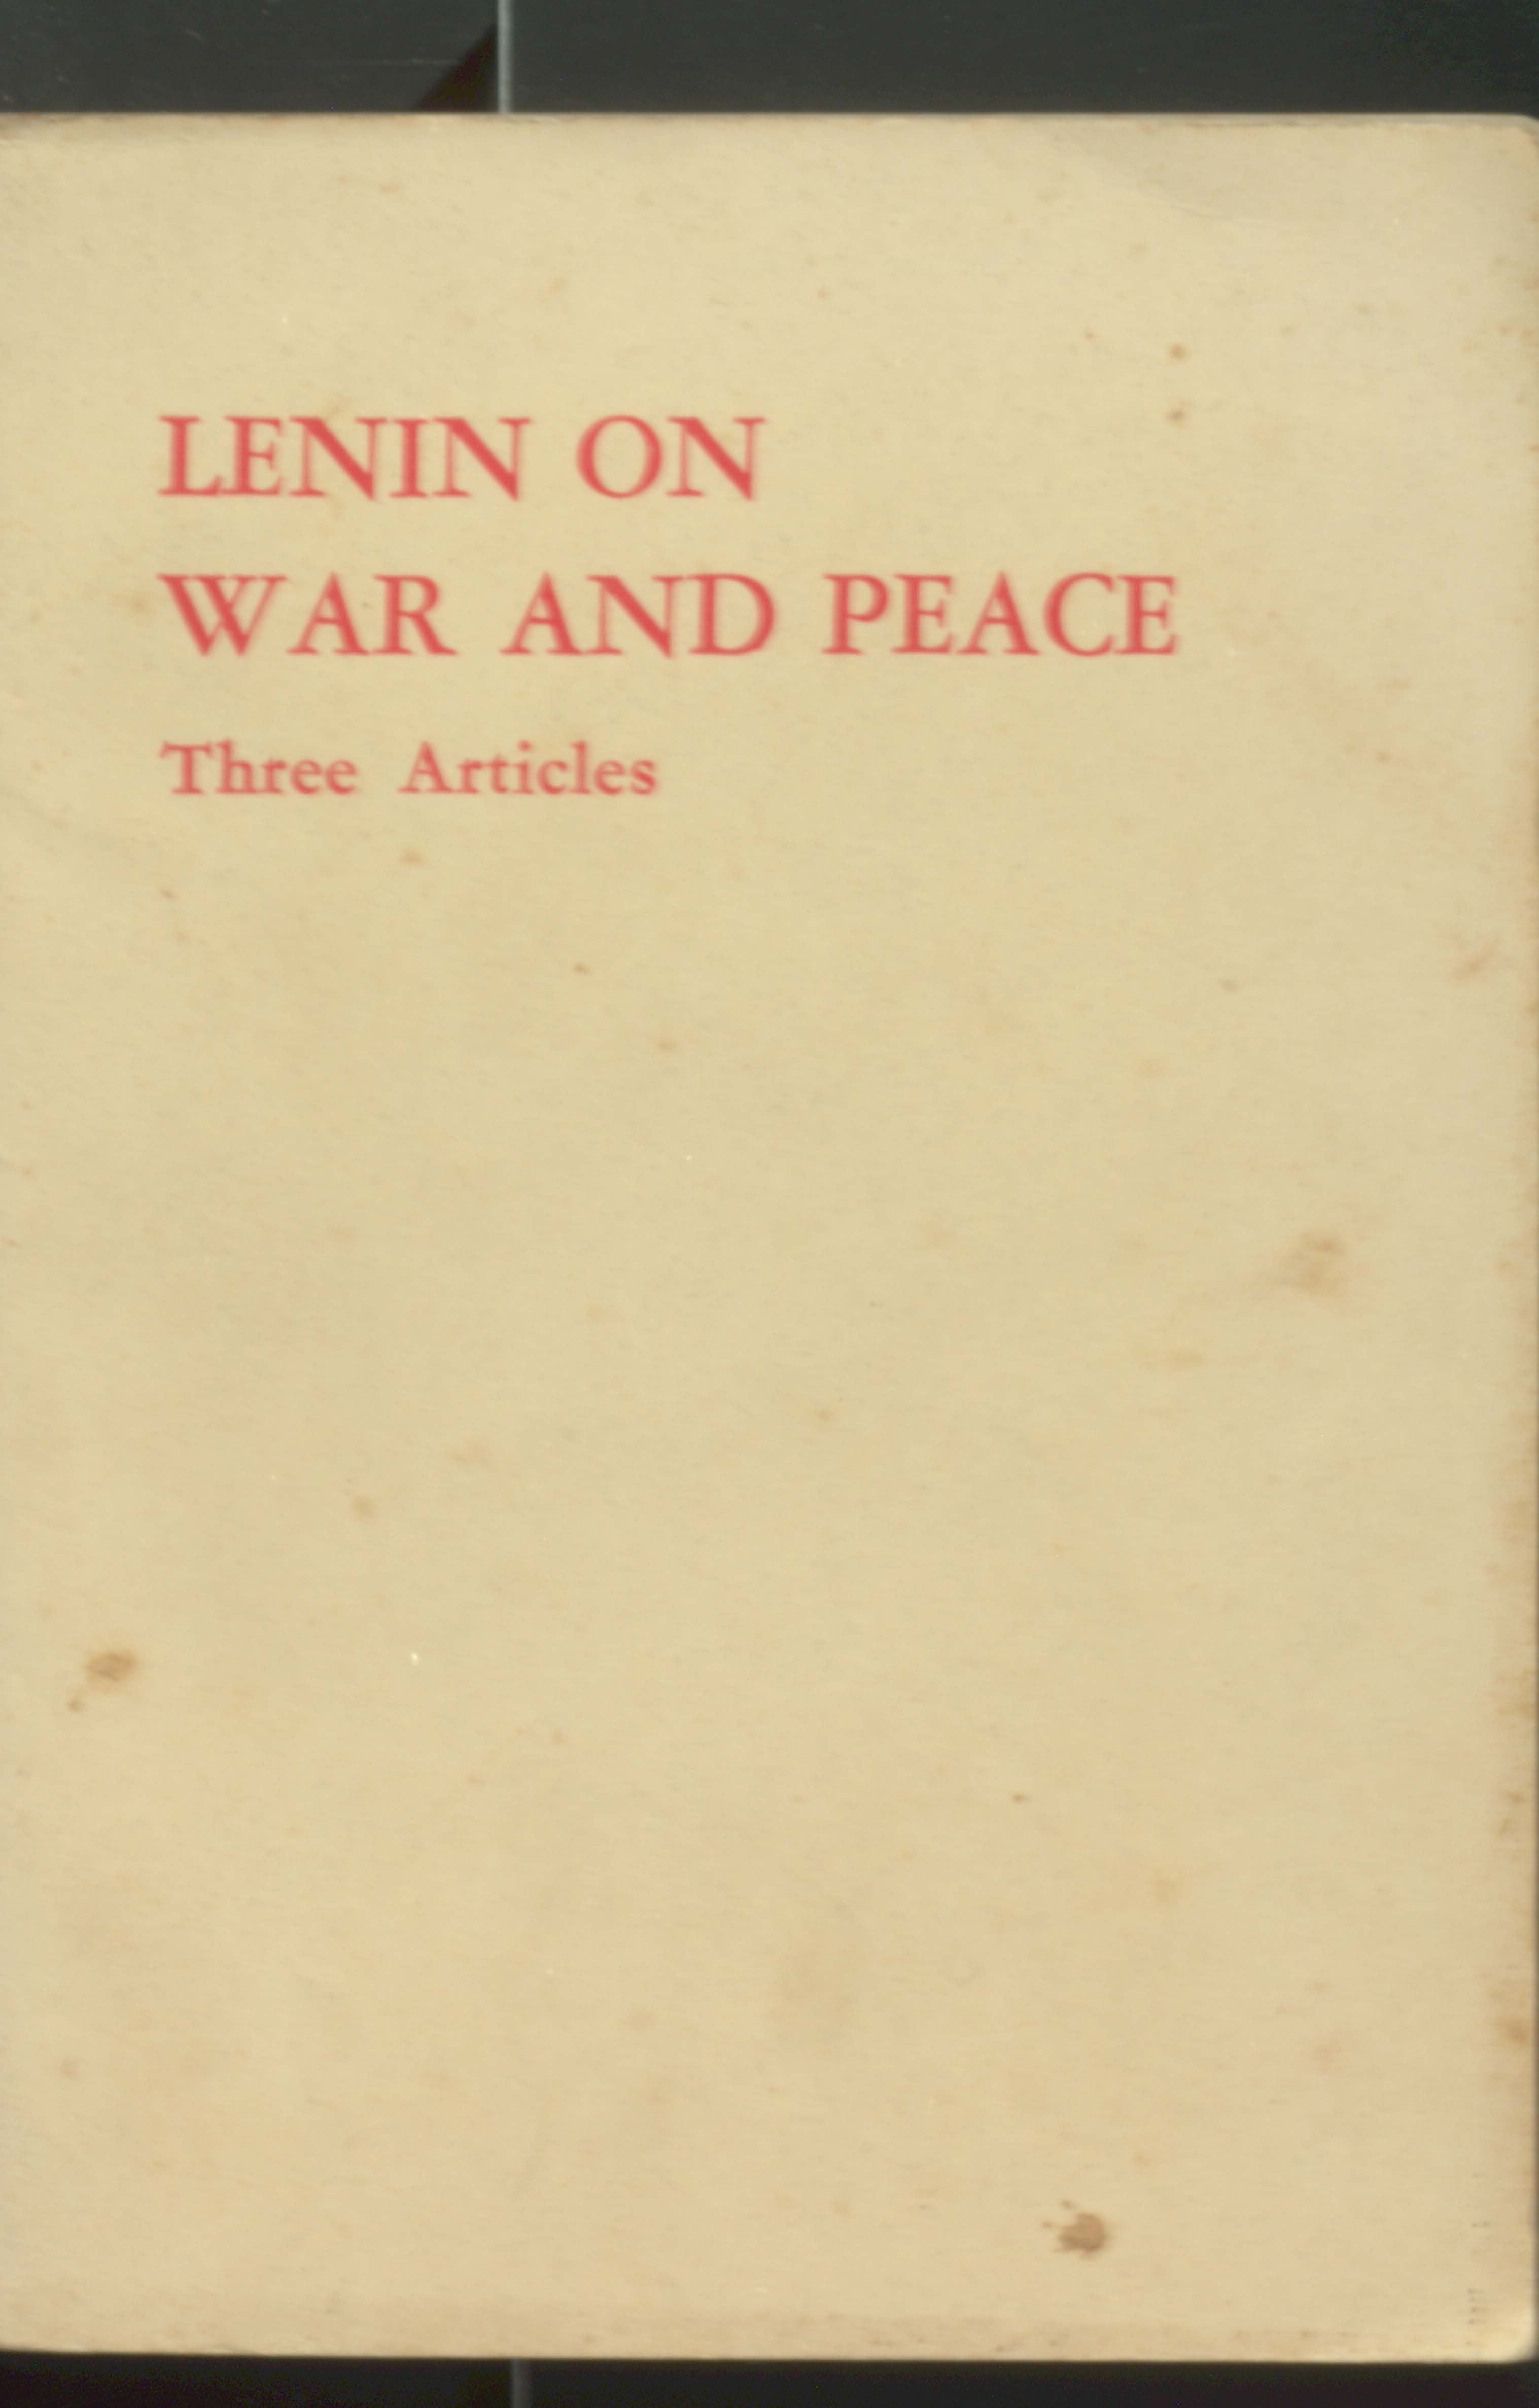 Lenin on war and peace three articles